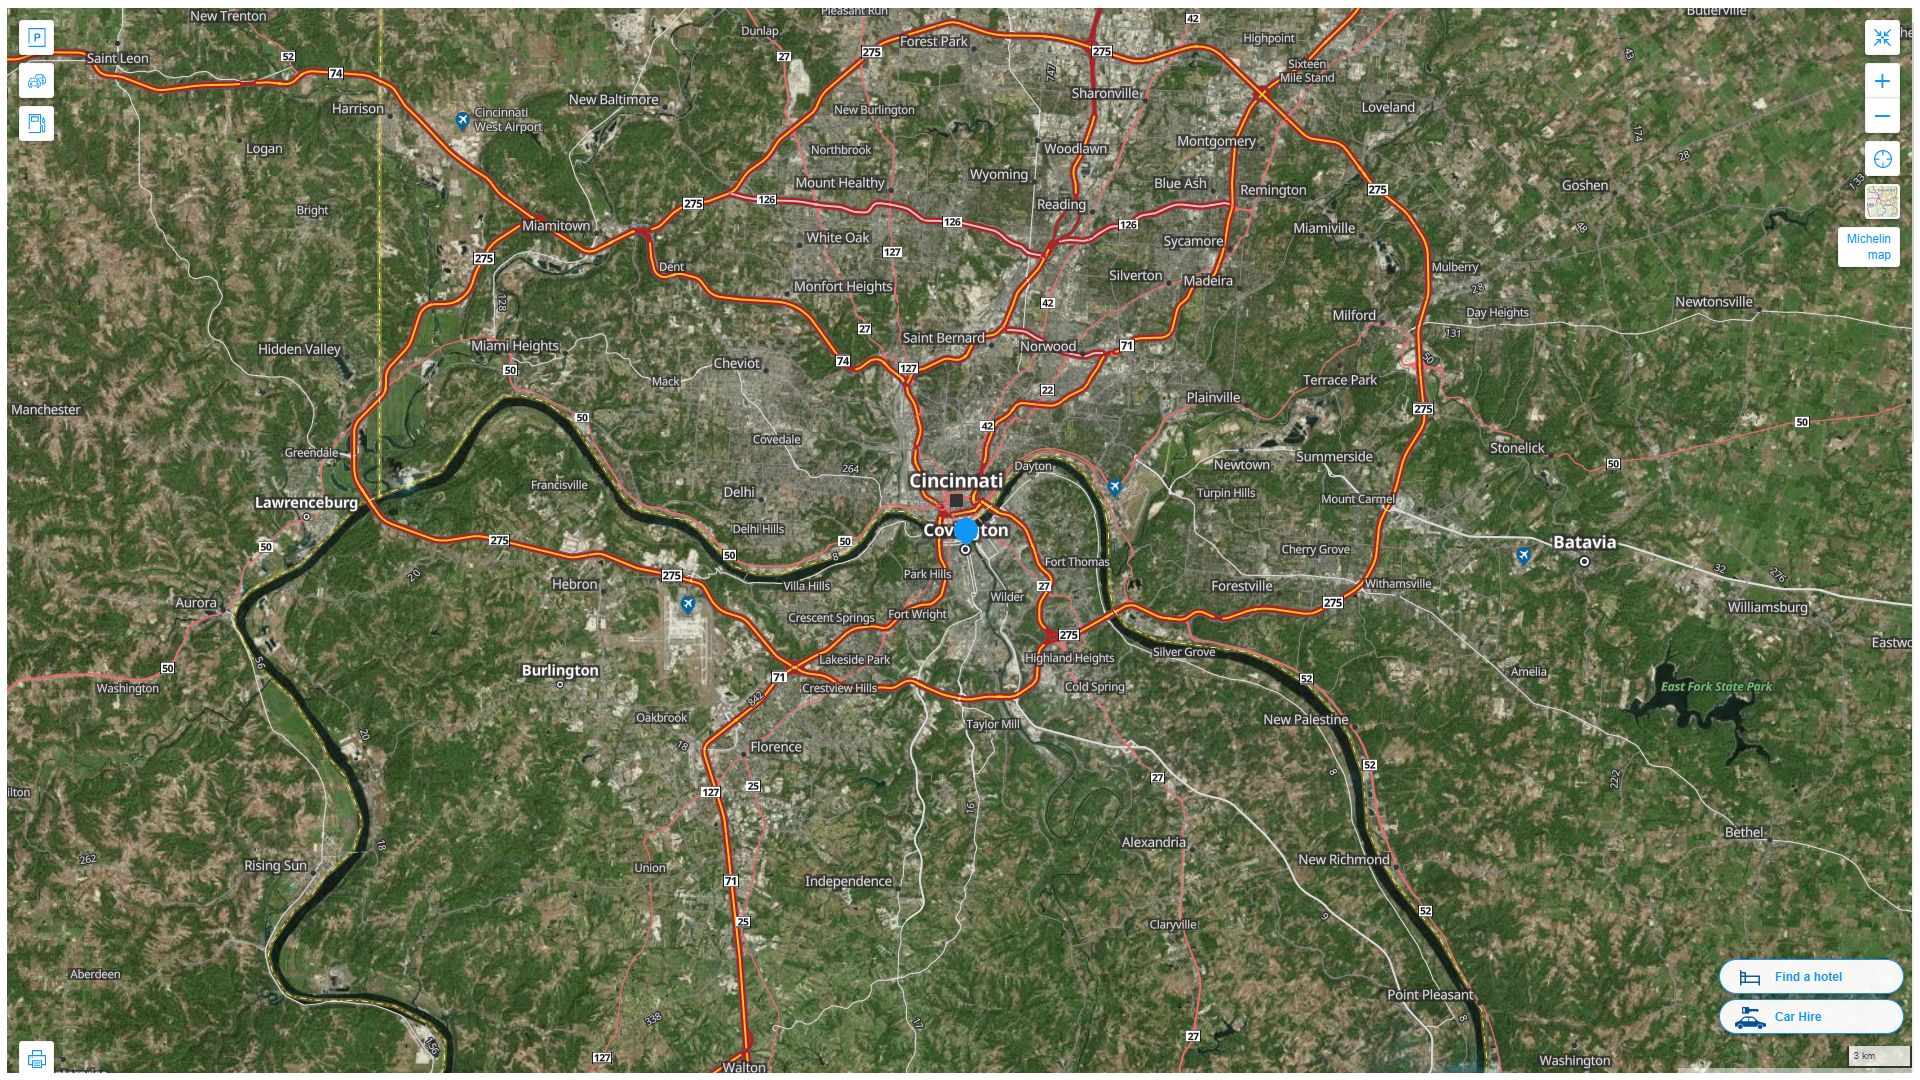 Covington Kentucky Highway and Road Map with Satellite View